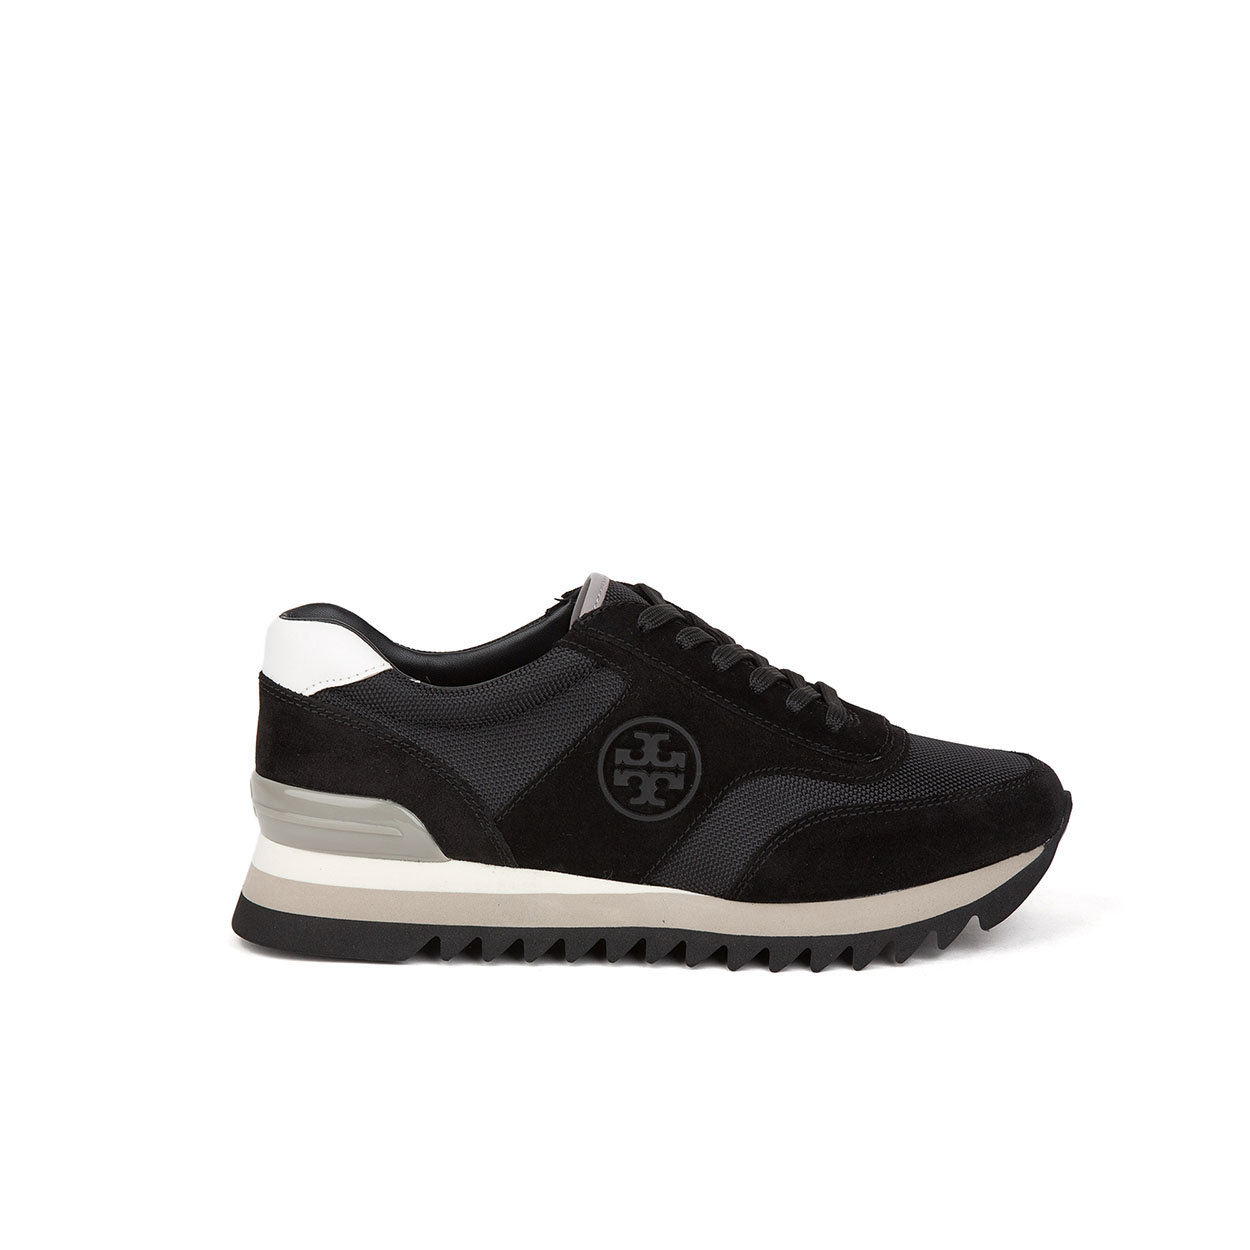 Tory Burch Sawtooth Logo sneakers multicolor - Tory Burch - Purchase on  Ventis.